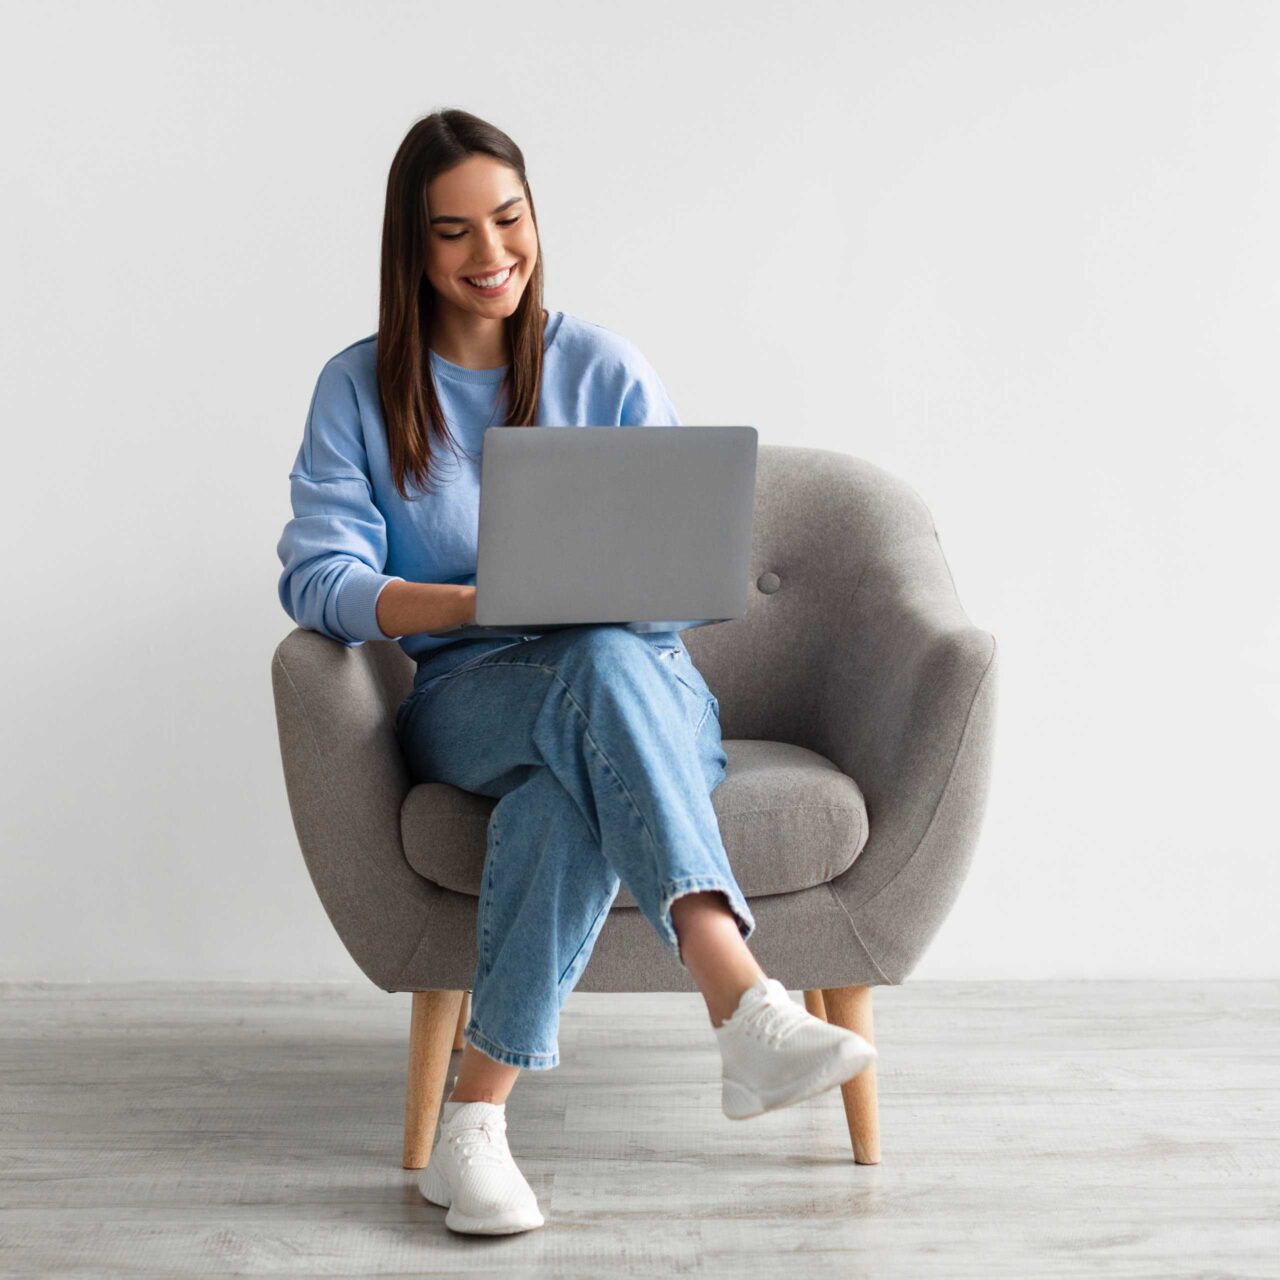 Woman In Chair With Laptop